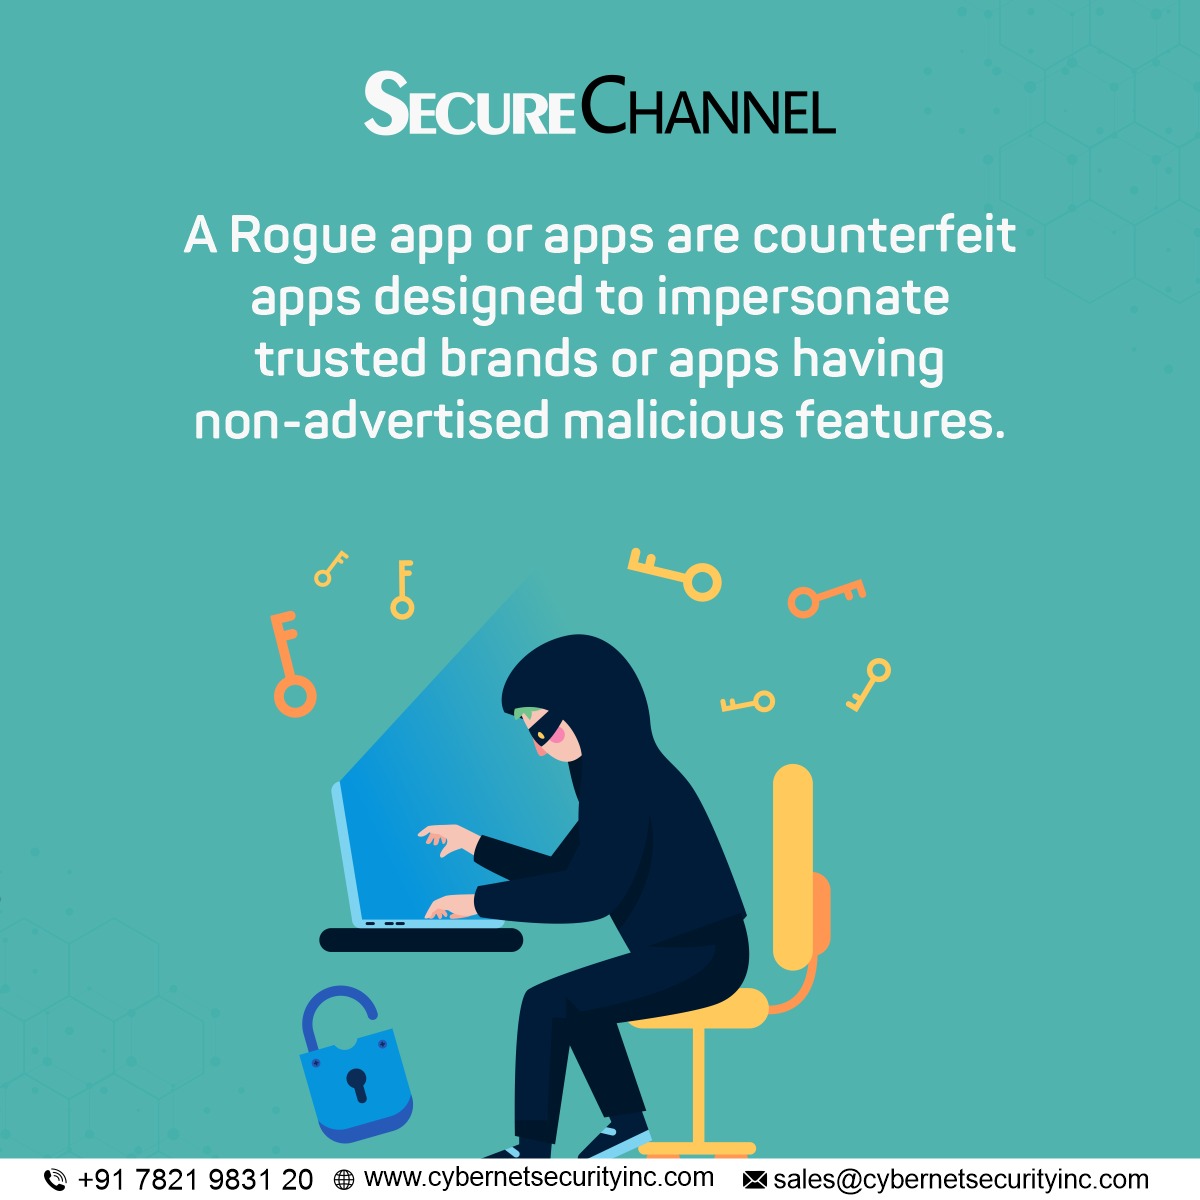 Beware of #RougeApps 
Do you have #SecureChannel security in your system?  #cybersecurity #security #cybersecuritytraining #banks #securityservices #phoneapplication #cyberattack #applicationsecurity #softwaresecurity #cybernetsecurity #paymentapplication #paymentapplication